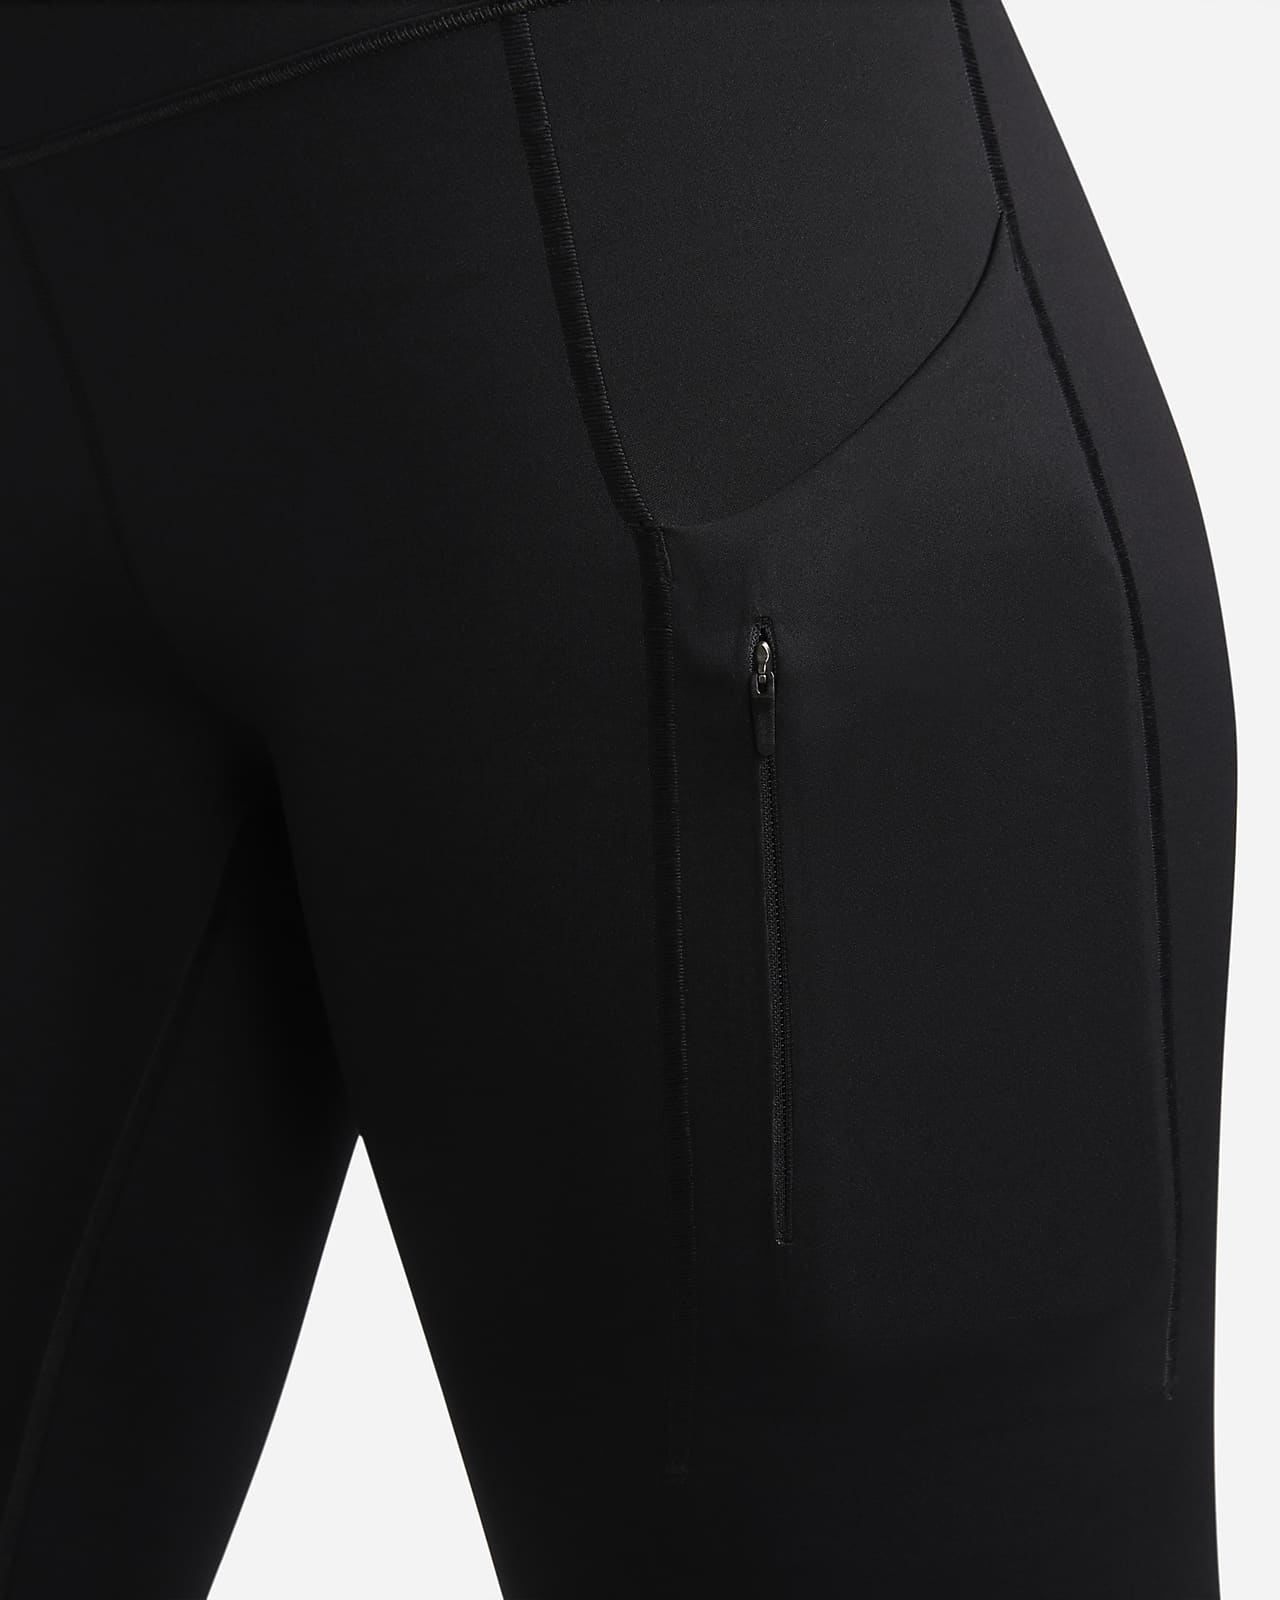 Nike Go Women's Firm-Support High-Waisted Cropped Leggings with Pockets